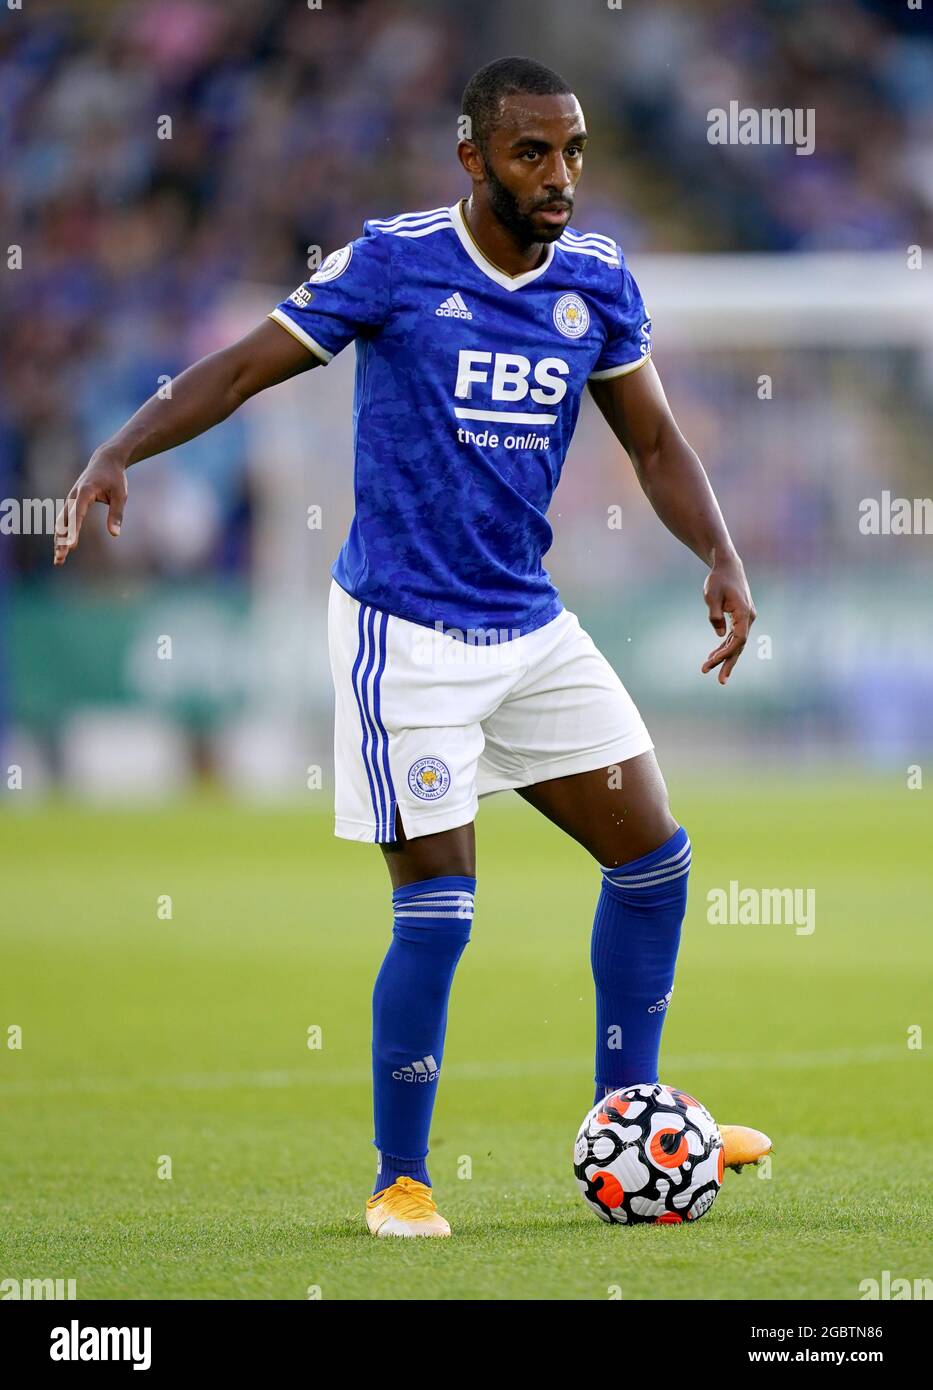 Leicester City's Ricardo Pereira during the Pre-Season Friendly match at The King Power Stadium, Leicester. Picture date: Wednesday August 4, 2021. Stock Photo